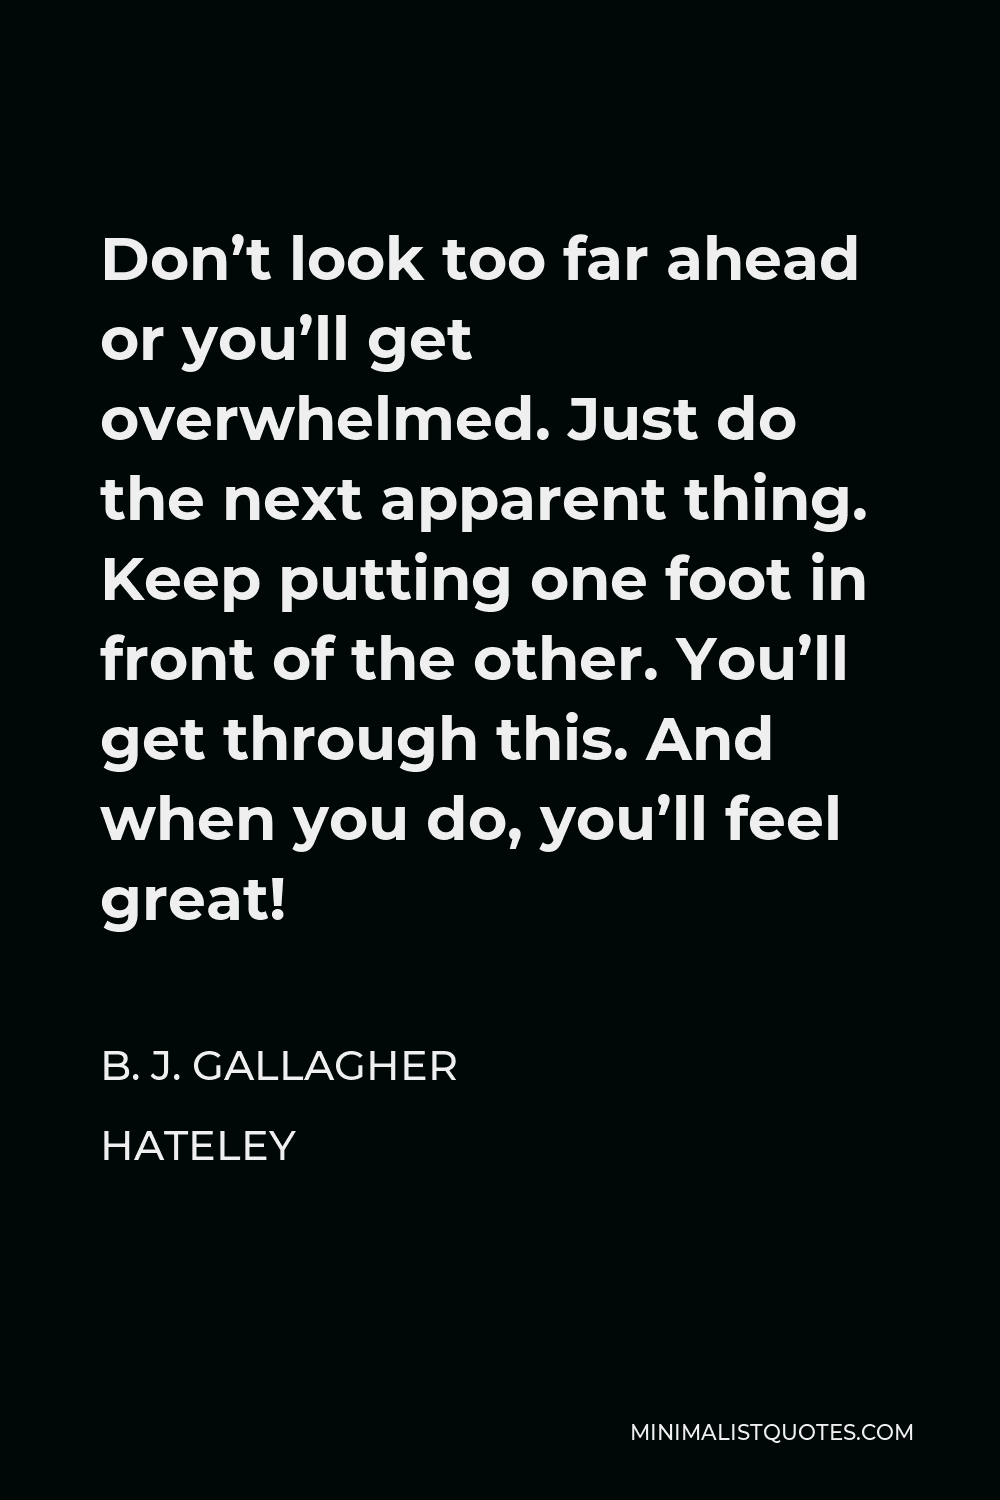 B. J. Gallagher Hateley Quote - Don’t look too far ahead or you’ll get overwhelmed. Just do the next apparent thing. Keep putting one foot in front of the other. You’ll get through this. And when you do, you’ll feel great!